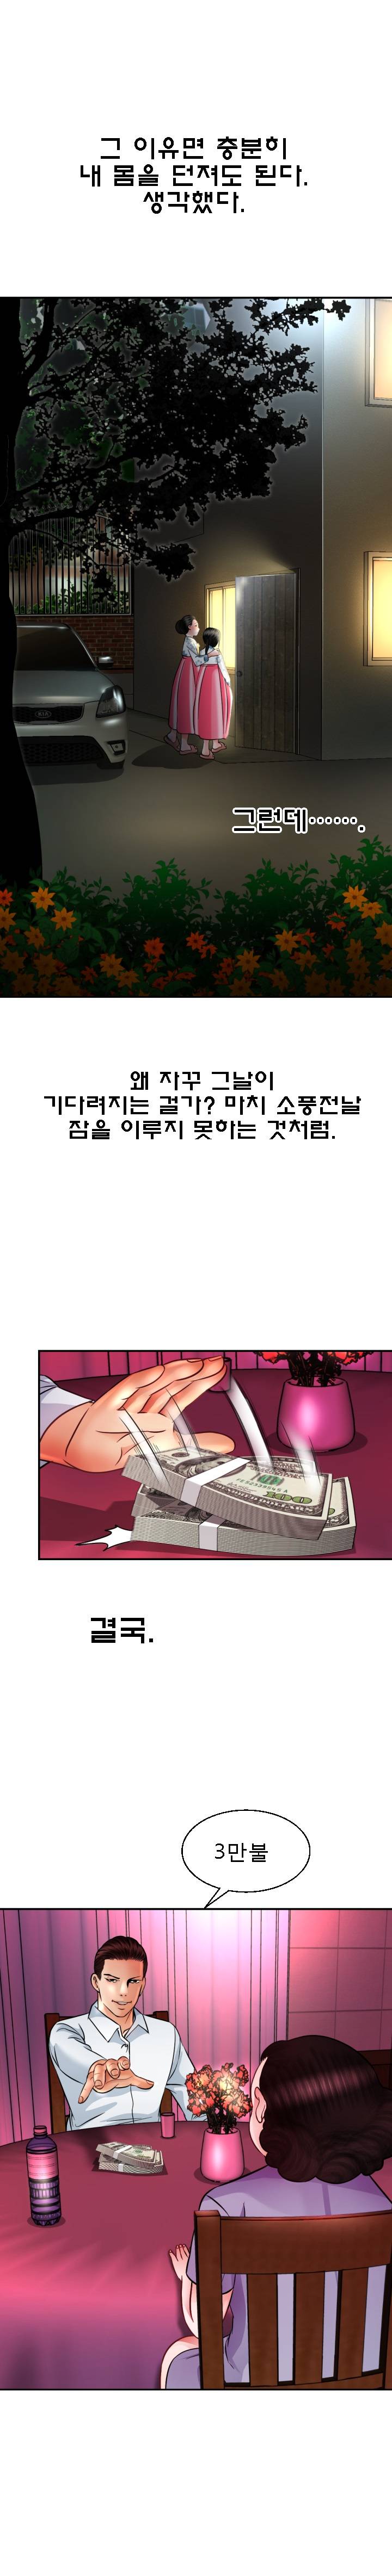 Restaurant Pyongyang Raw - Chapter 2 Page 21